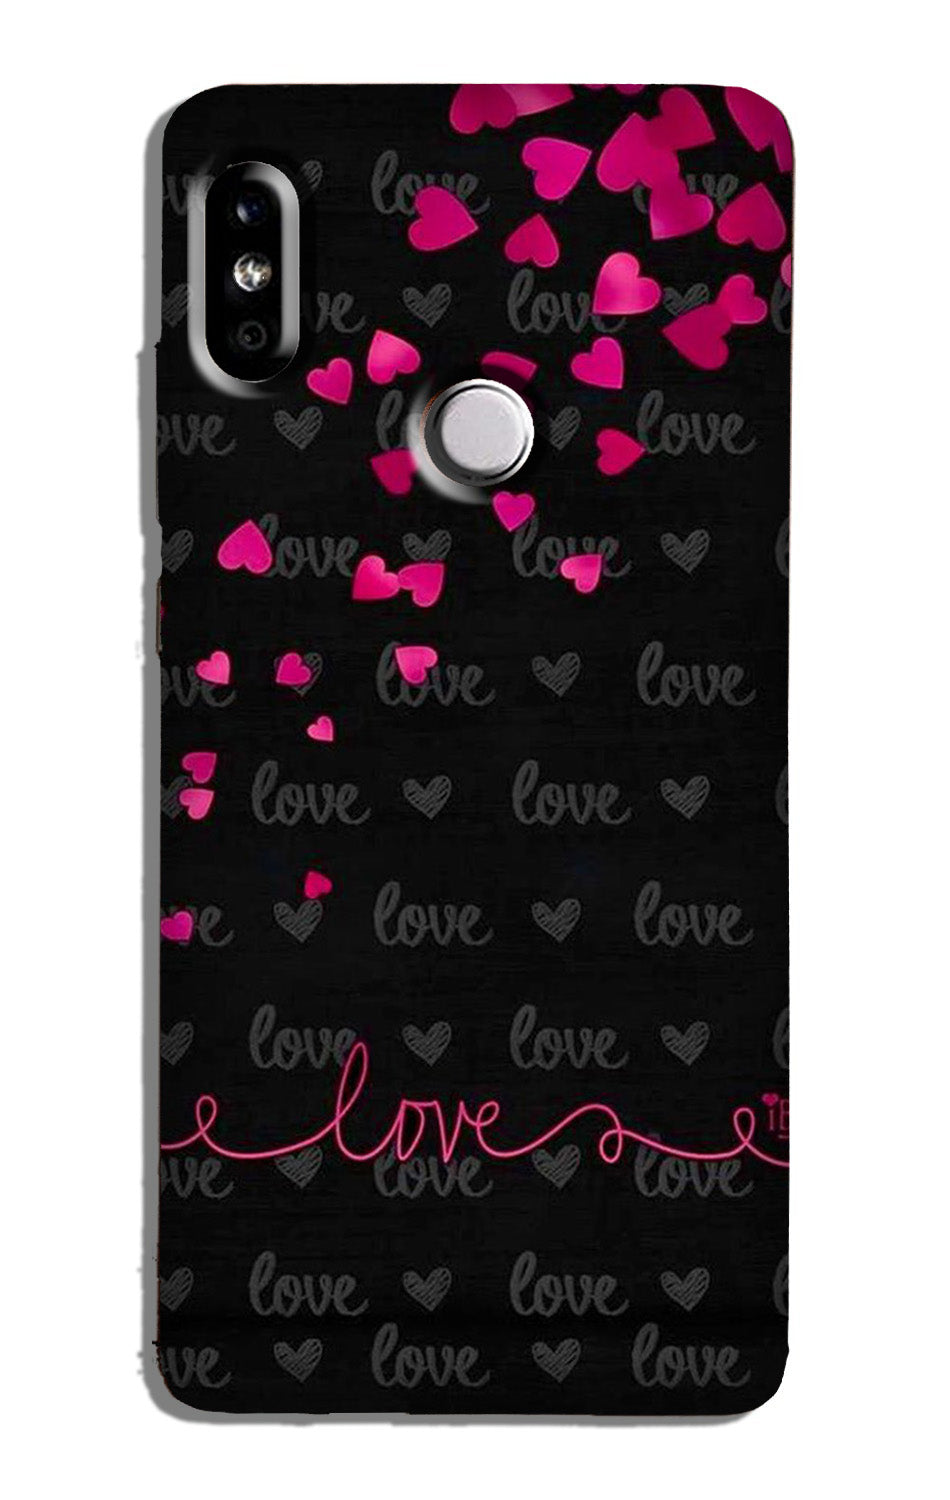 Love in Air Case for Redmi Note 6 Pro